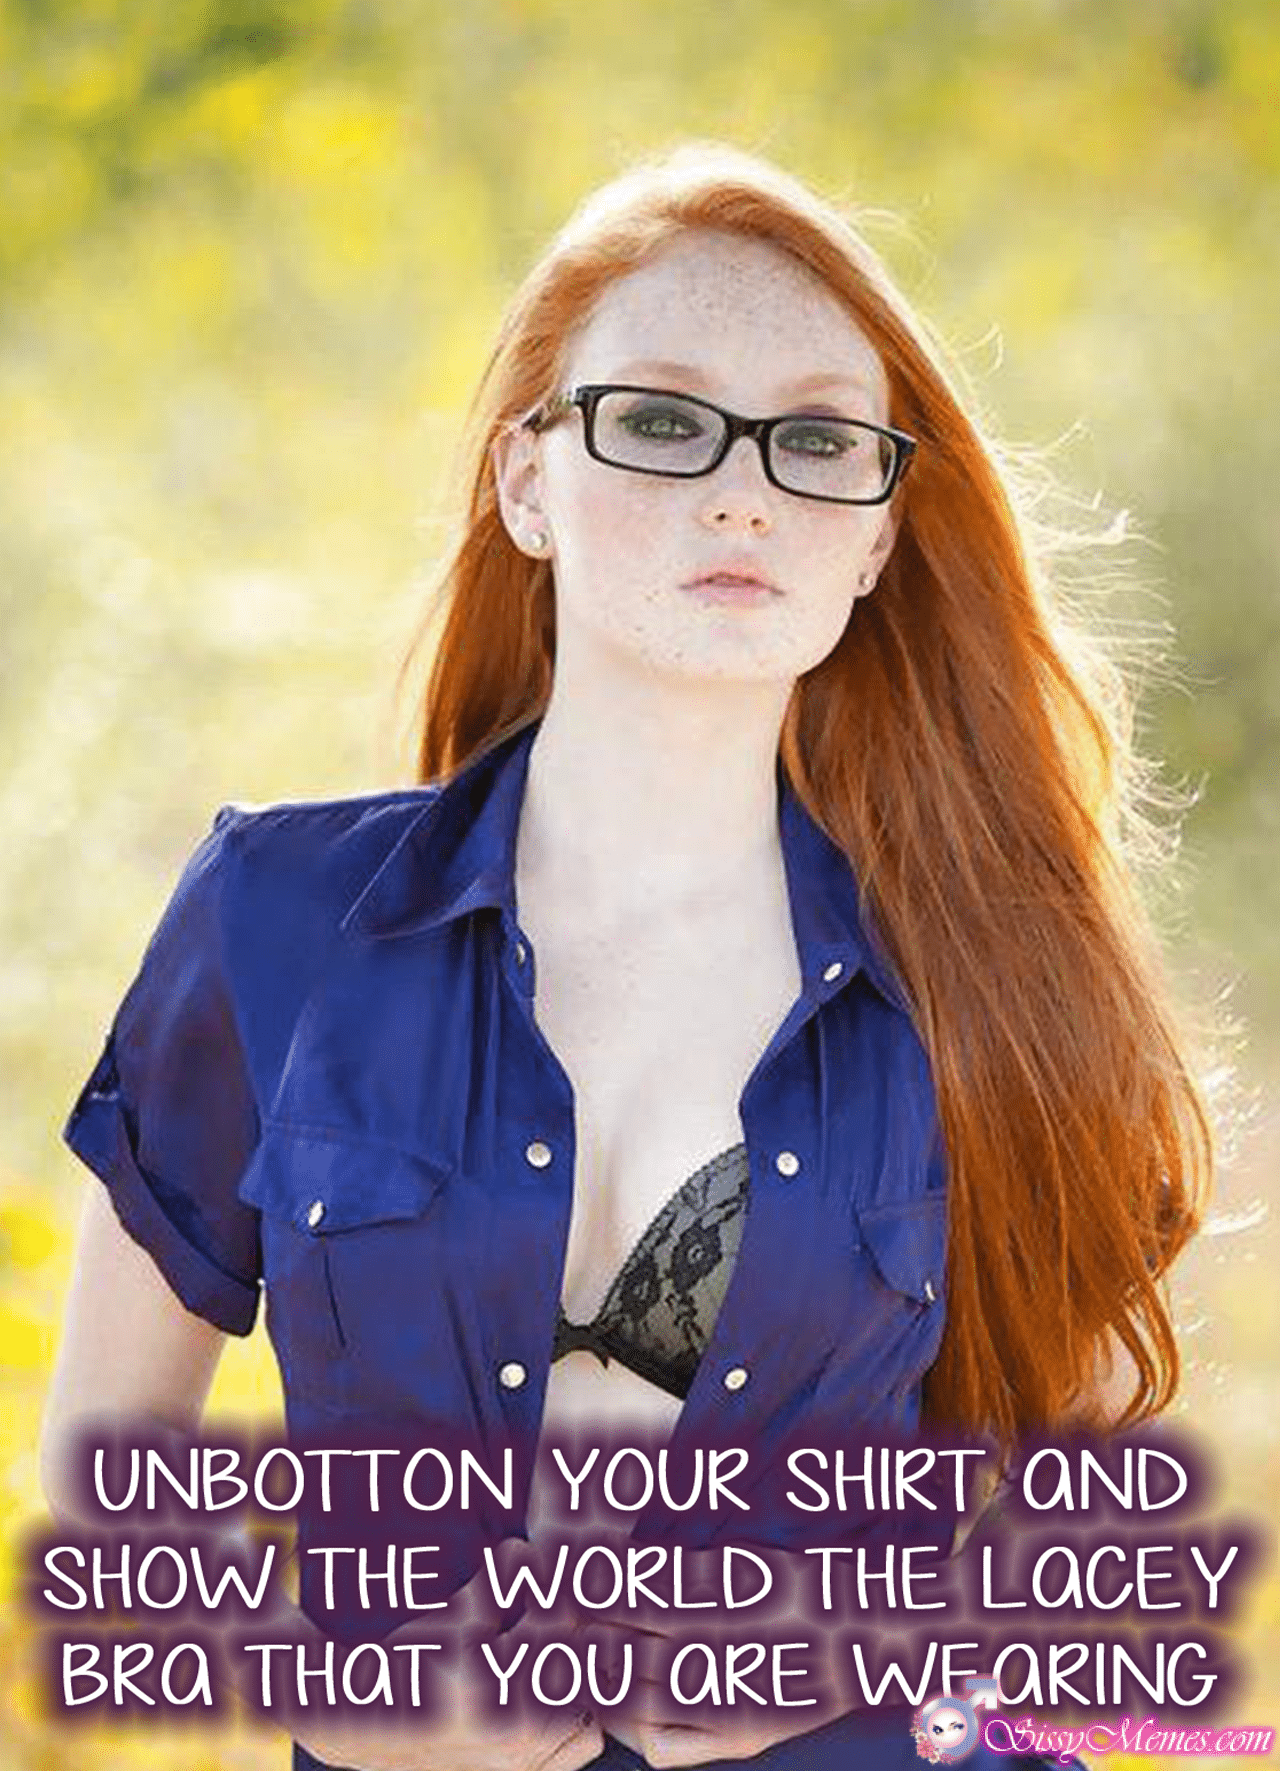 Training Hypno Feminization Femboy hotwife caption: UNBOTTON YOUR SHIRT AND SHOW THE WORLD THE LACEY BRA THAT YOU ARE WEARING Redhead Sissygirl in Unbuttoned Shirt